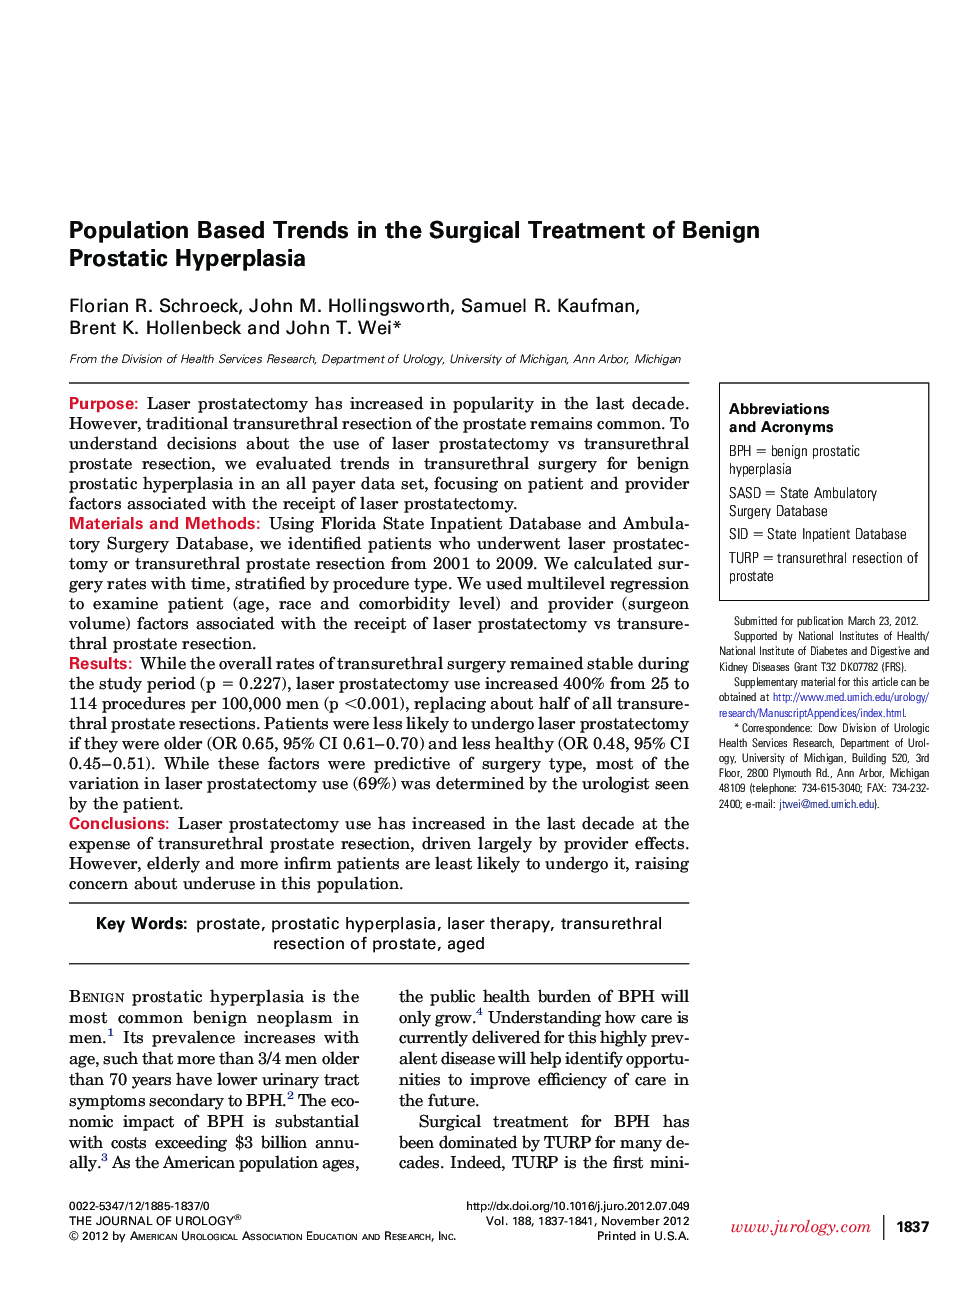 Population Based Trends in the Surgical Treatment of Benign Prostatic Hyperplasia 